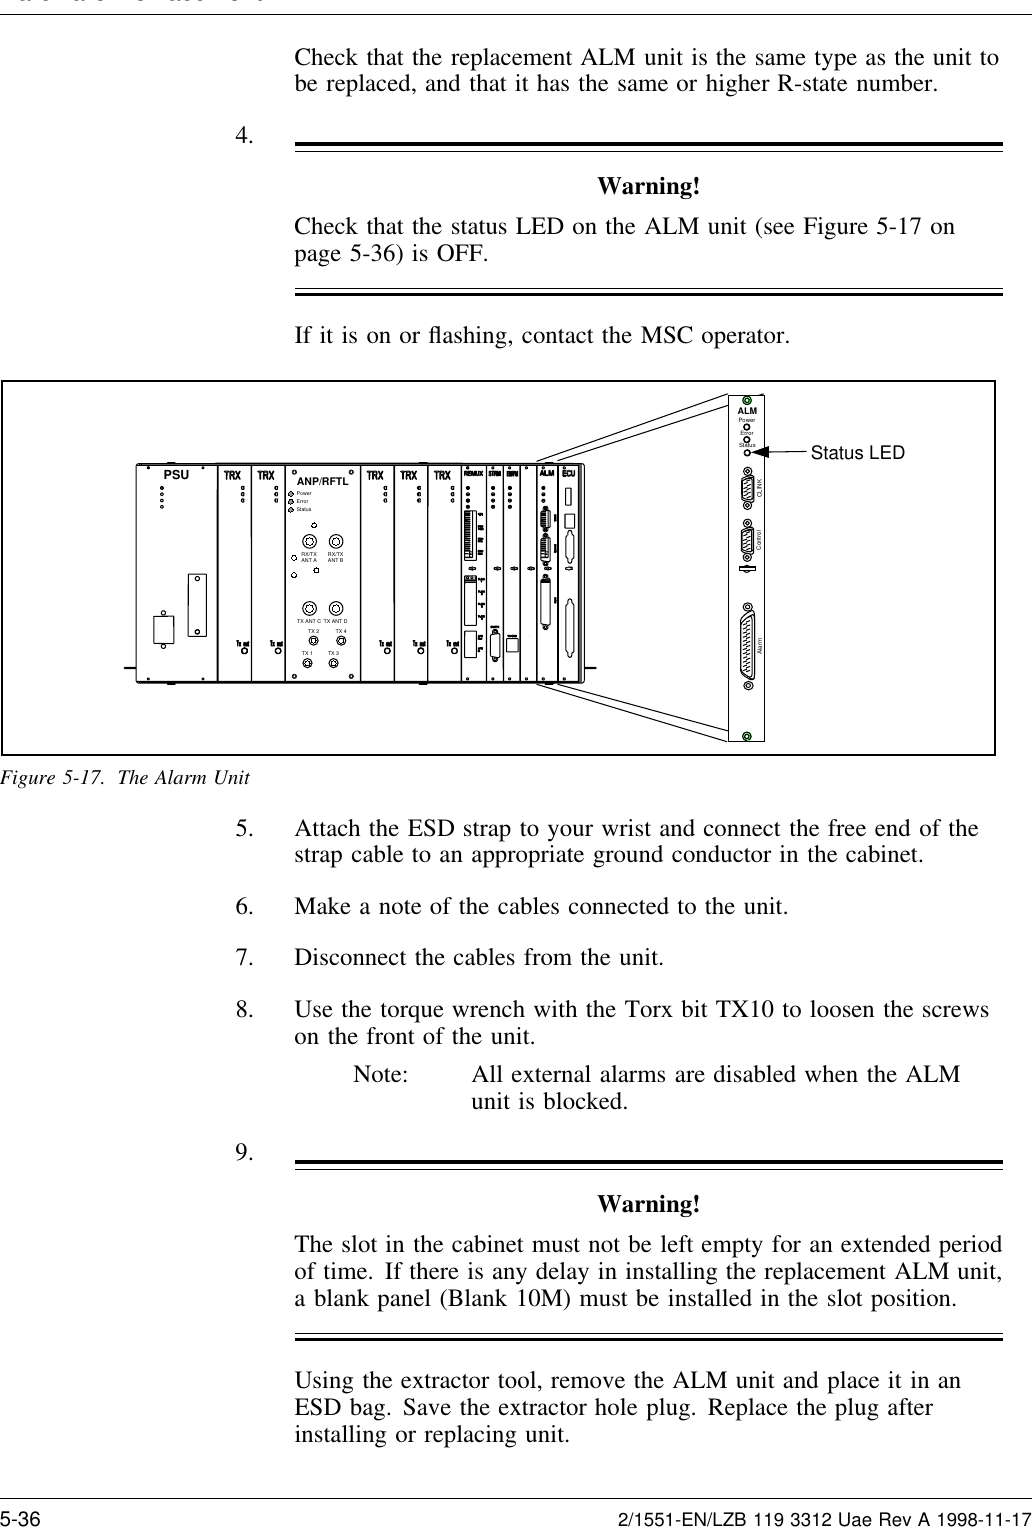 Hardware Re lacementCheck that the replacement ALM unit is the same type as the unit tobe replaced, and that it has the same or higher R-state number.4.Warning!Check that the status LED on the ALM unit (see Figure 5-17 onpage 5-36) is OFF.If it is on or ﬂashing, contact the MSC operator.Status LEDALMPowerErrorStatusCLINKControlAlarmTX 2TX 1TX 4TX 3RX/TXANT A RX/TXANT BTX ANT C TX ANT DPowerErrorStatusANP/RFTLPSUFigure 5-17. The Alarm Unit5. Attach the ESD strap to your wrist and connect the free end of thestrap cable to an appropriate ground conductor in the cabinet.6. Make a note of the cables connected to the unit.7. Disconnect the cables from the unit.8. Use the torque wrench with the Torx bit TX10 to loosen the screwson the front of the unit.Note: All external alarms are disabled when the ALMunit is blocked.9.Warning!The slot in the cabinet must not be left empty for an extended periodof time. If there is any delay in installing the replacement ALM unit,a blank panel (Blank 10M) must be installed in the slot position.Using the extractor tool, remove the ALM unit and place it in anESD bag. Save the extractor hole plug. Replace the plug afterinstalling or replacing unit.5-36 2/1551-EN/LZB 119 3312 Uae Rev A 1998-11-17